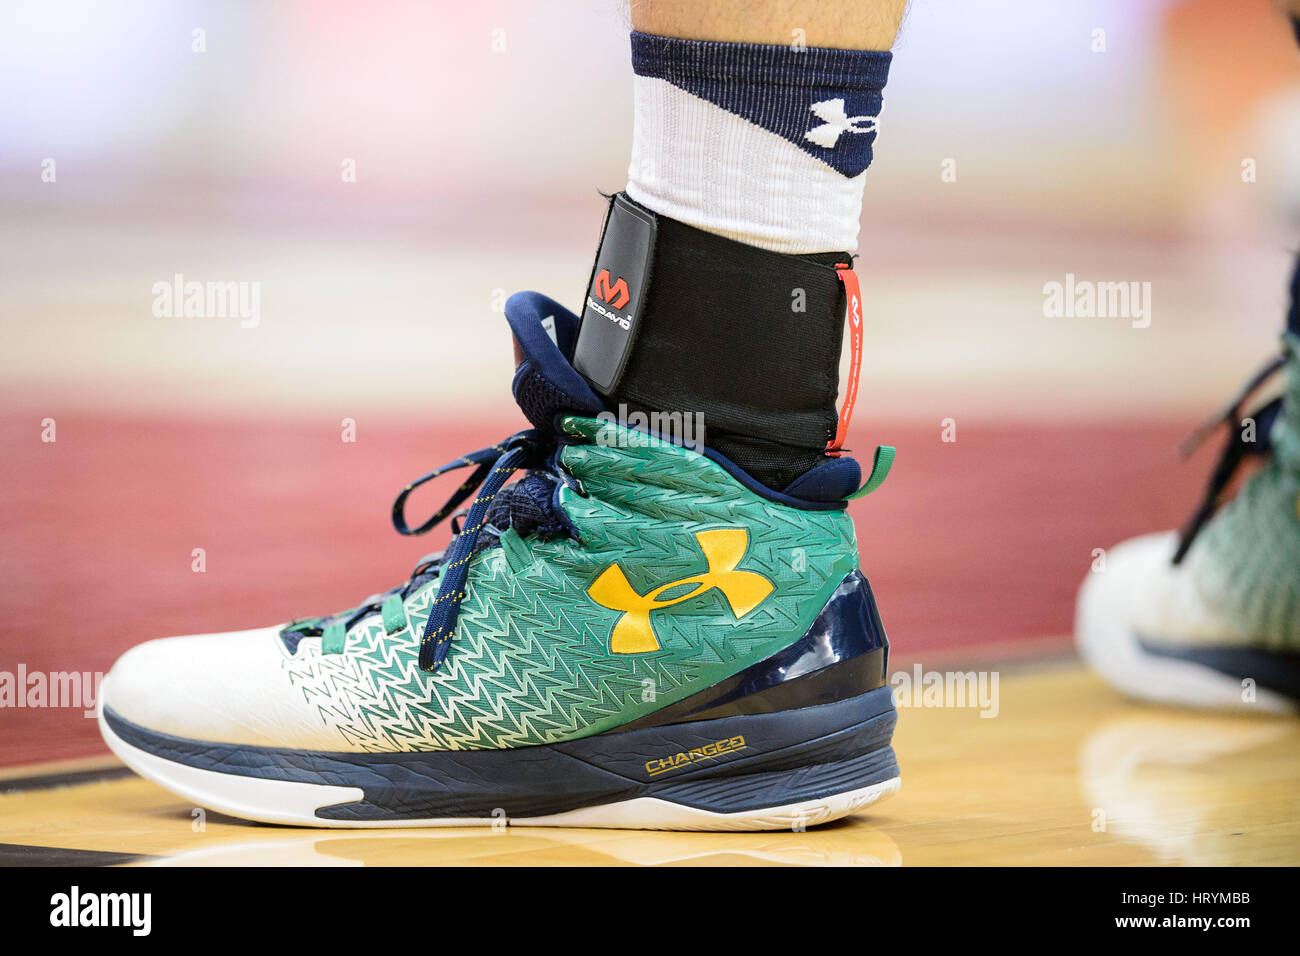 The shoes of Notre Dame forward Martinas Geben (23) during the NCAA College  Basketball game between the Louisville Cardinals and the Notre Dame  Fighting Irish at the KFC Yum! Center on Saturday